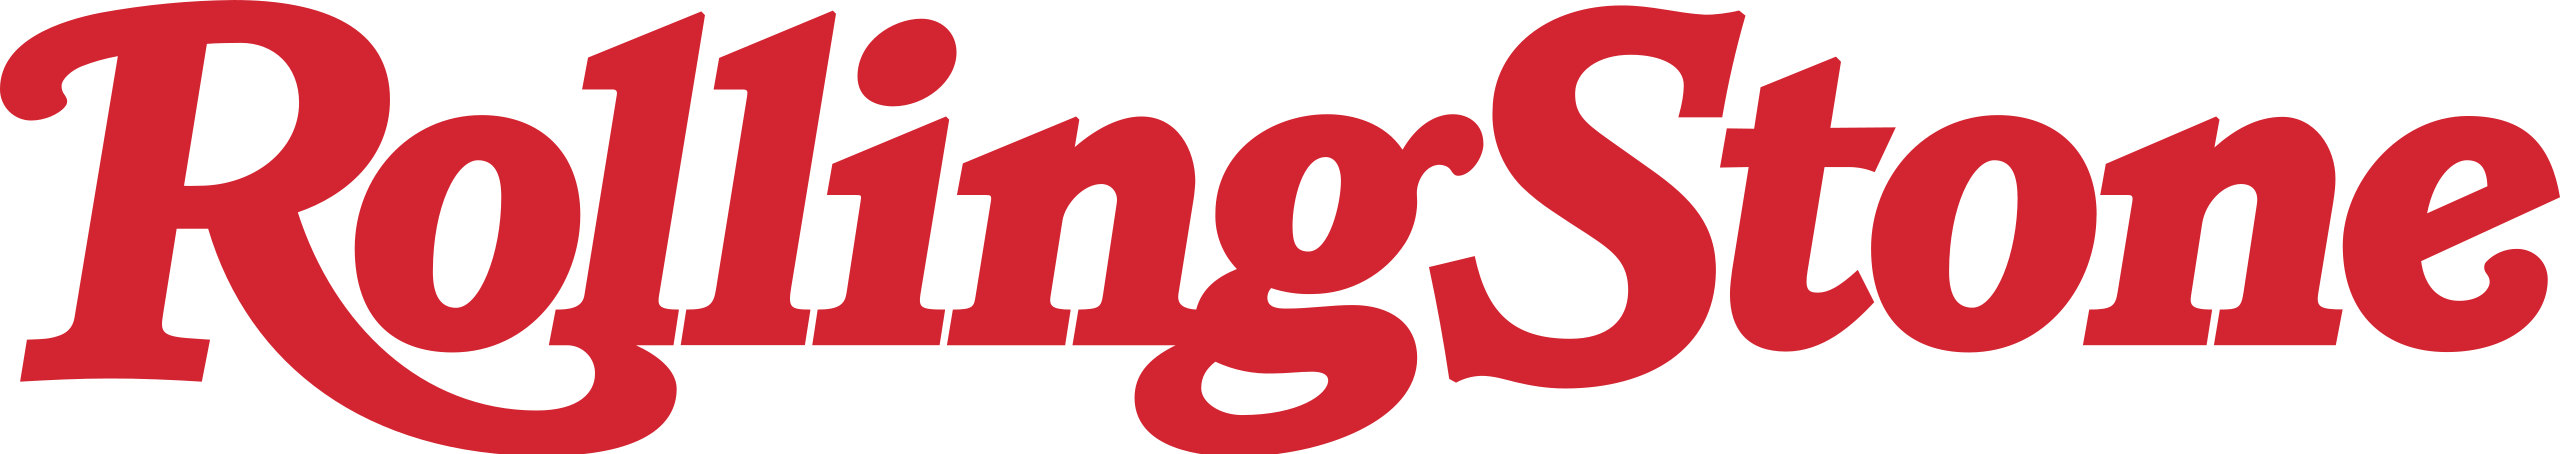 rolling-stone-logo.png (102 KB)